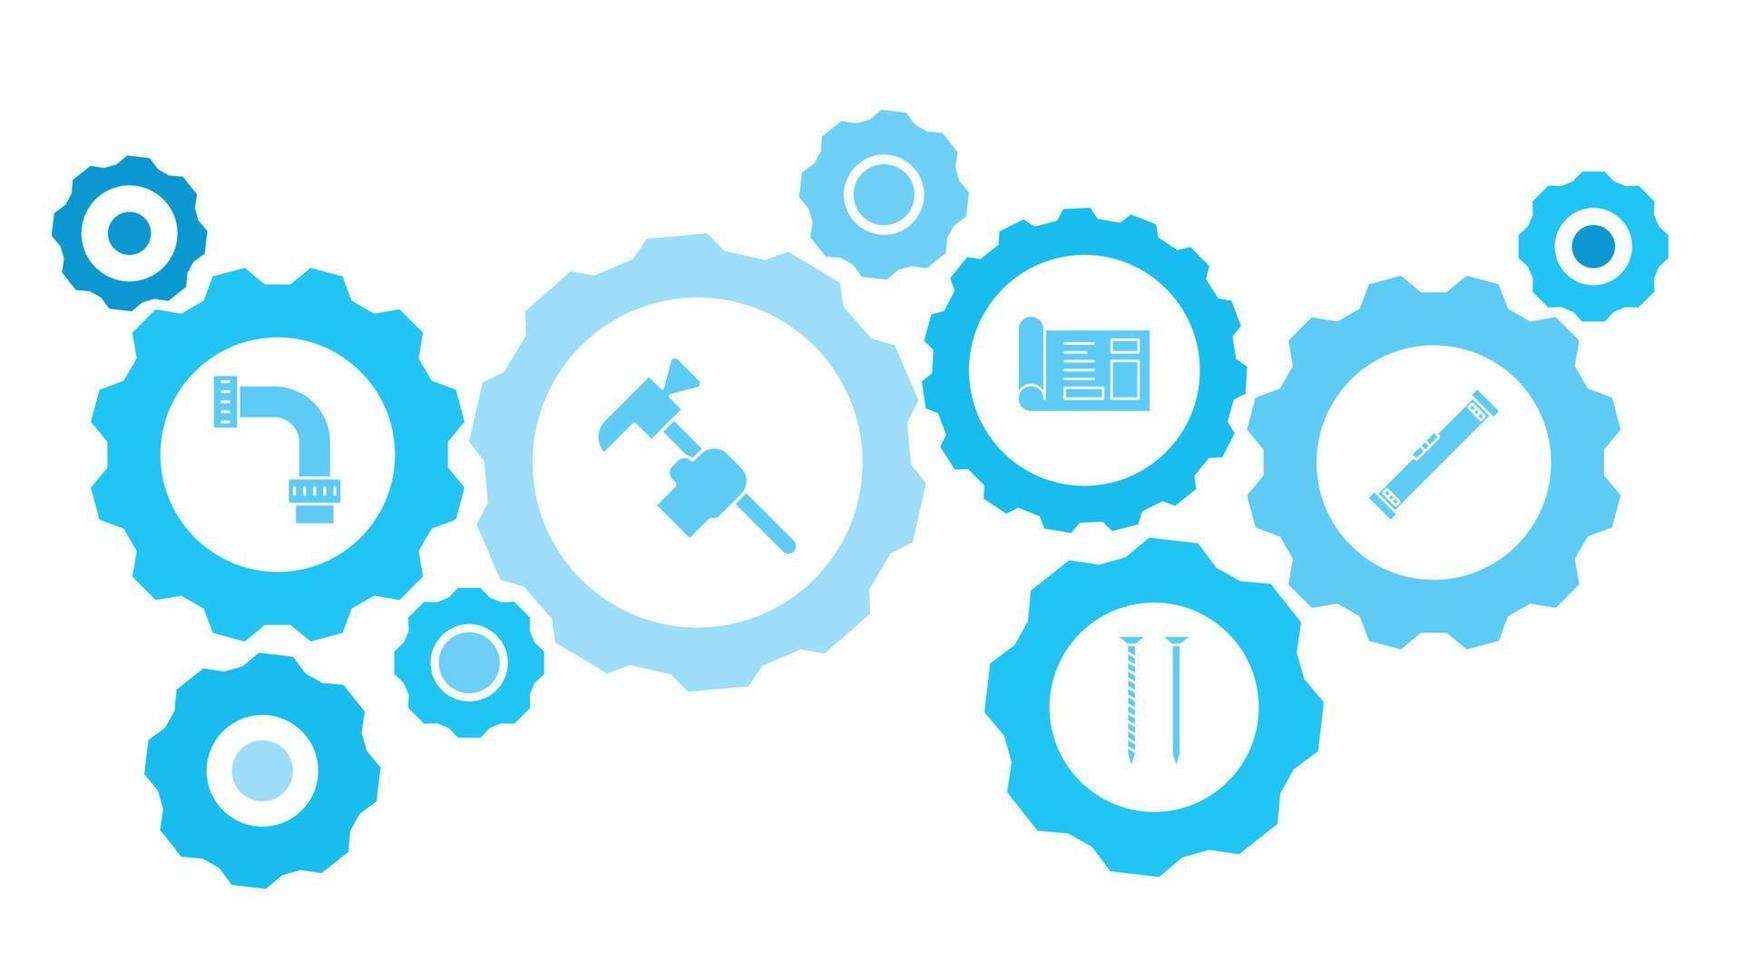 Connected gears and vector icons for logistic, service, shipping, distribution, transport, market, communicate concepts. building, construction, industry, level gear blue icon set on white background